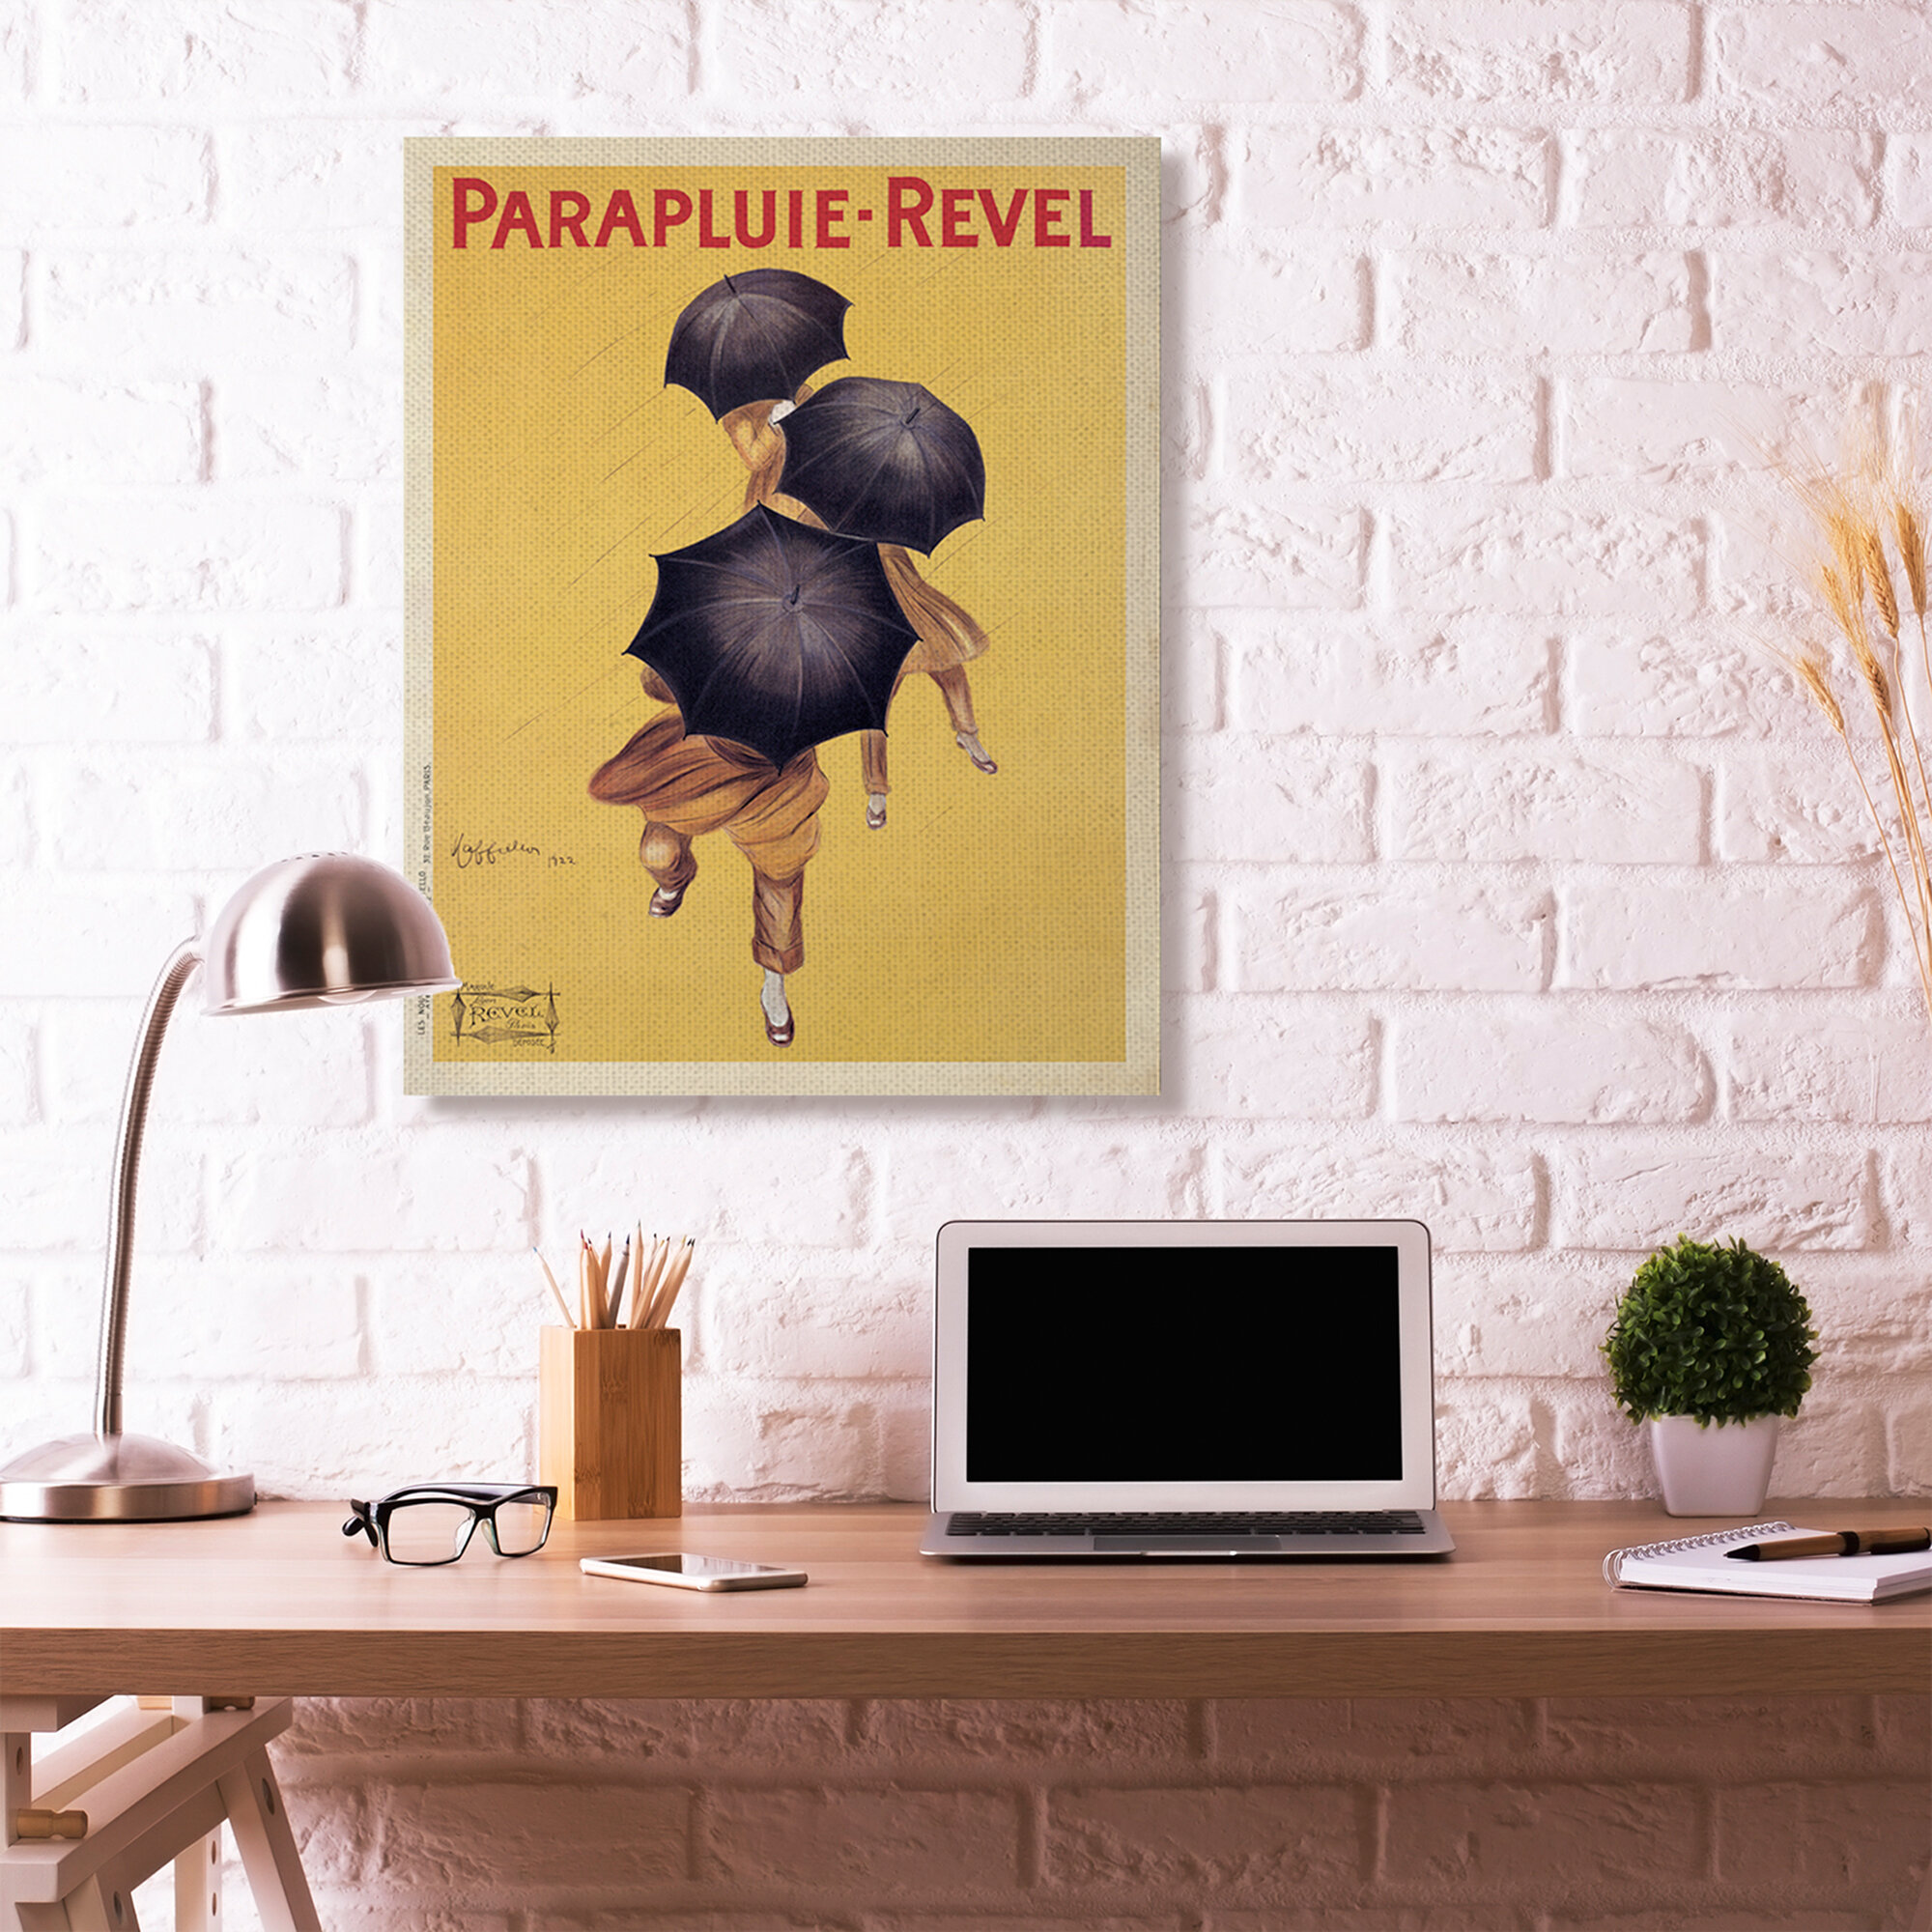 Parapluie-Revel Vintage Poster Yellow Design by Marcello Dudovich - Graphic  Art